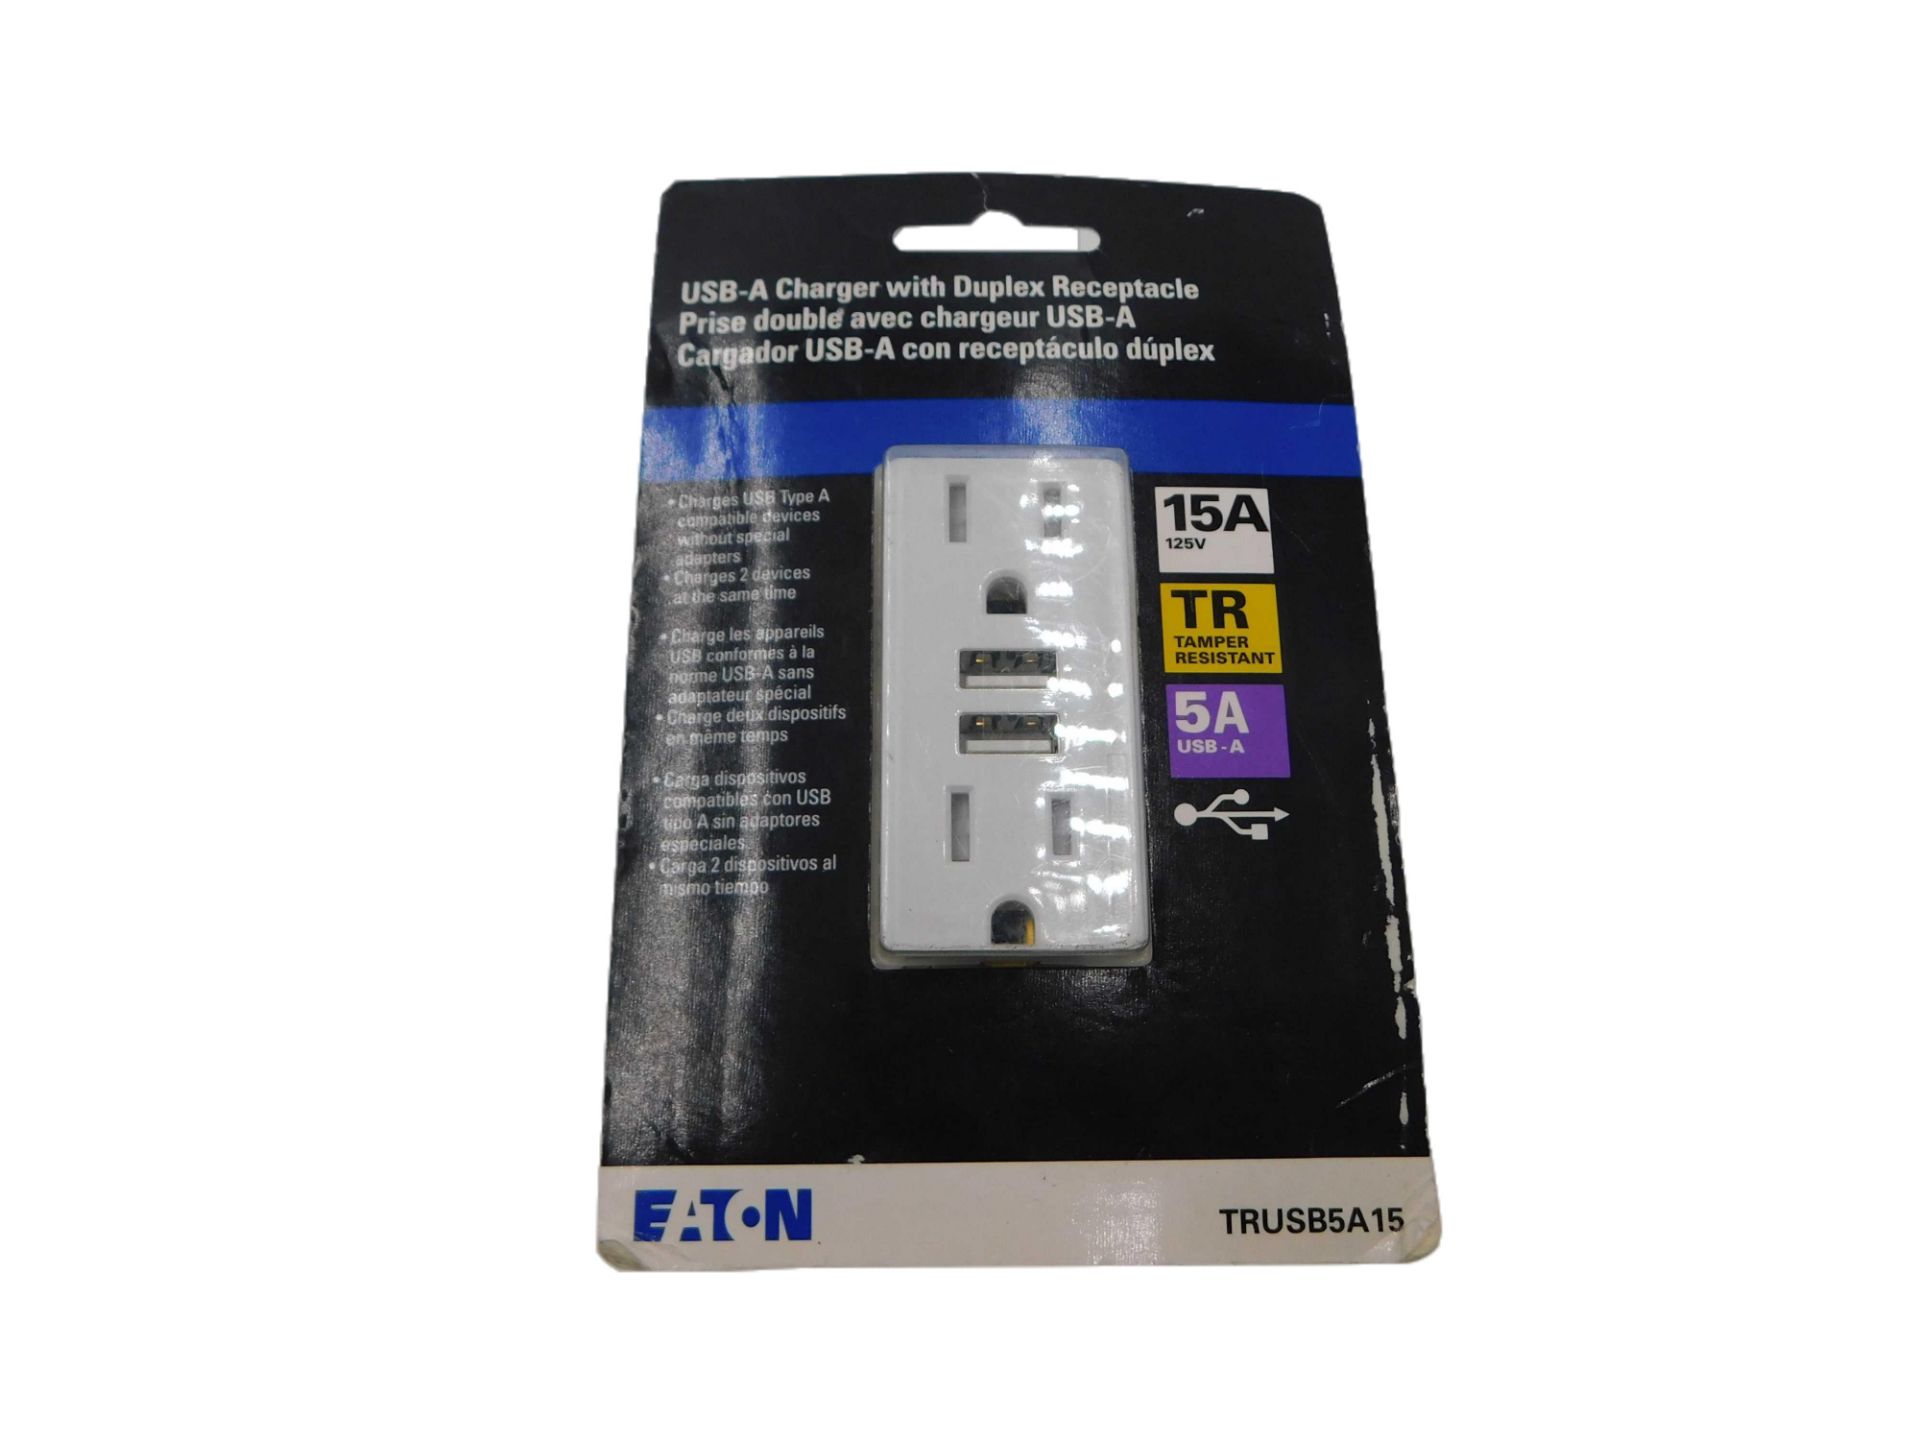 30x Eaton TRUSB5A15W-KB-LW Outlets Combination USB Charger/Duplex Receptacle 15A 125V White EA Tampe